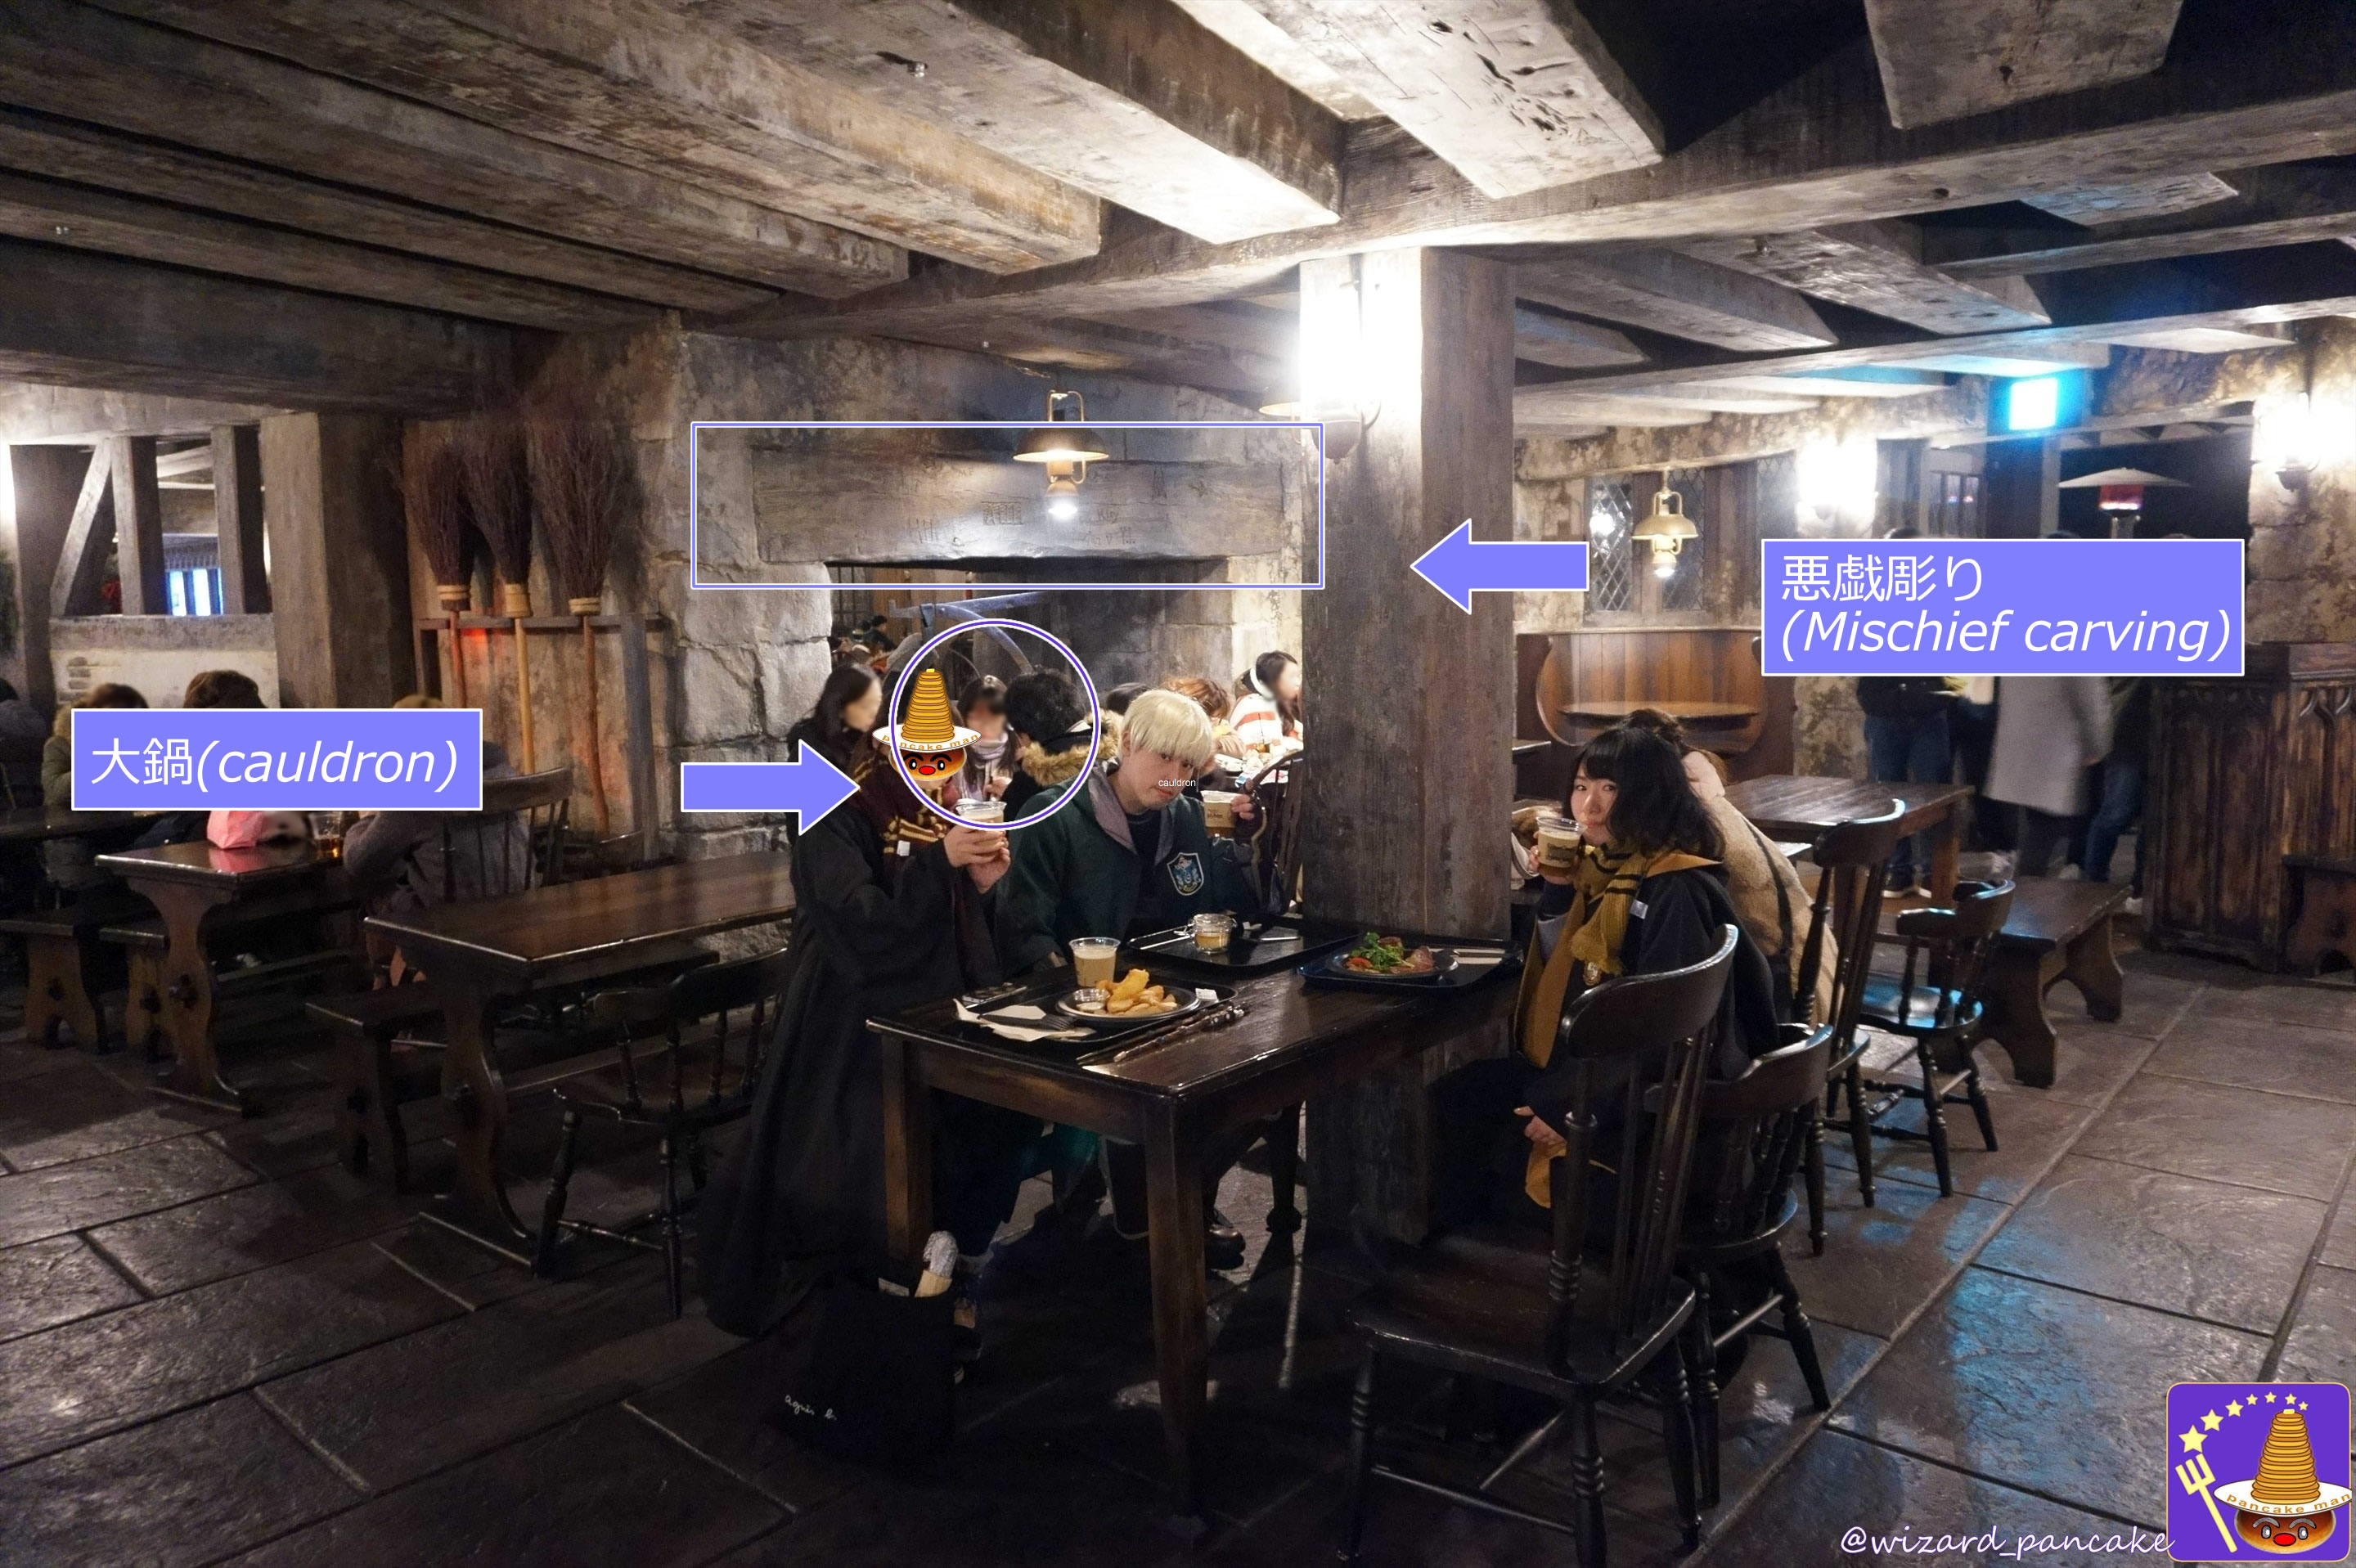 Hidden Spots] 1. look for graffiti carvings in the fireplace of the cauldron! 2. listen to the sounds of the house servant fairies in action (Three Broomsticks & Hog's Head pub) USJ "Harry Potter Area".